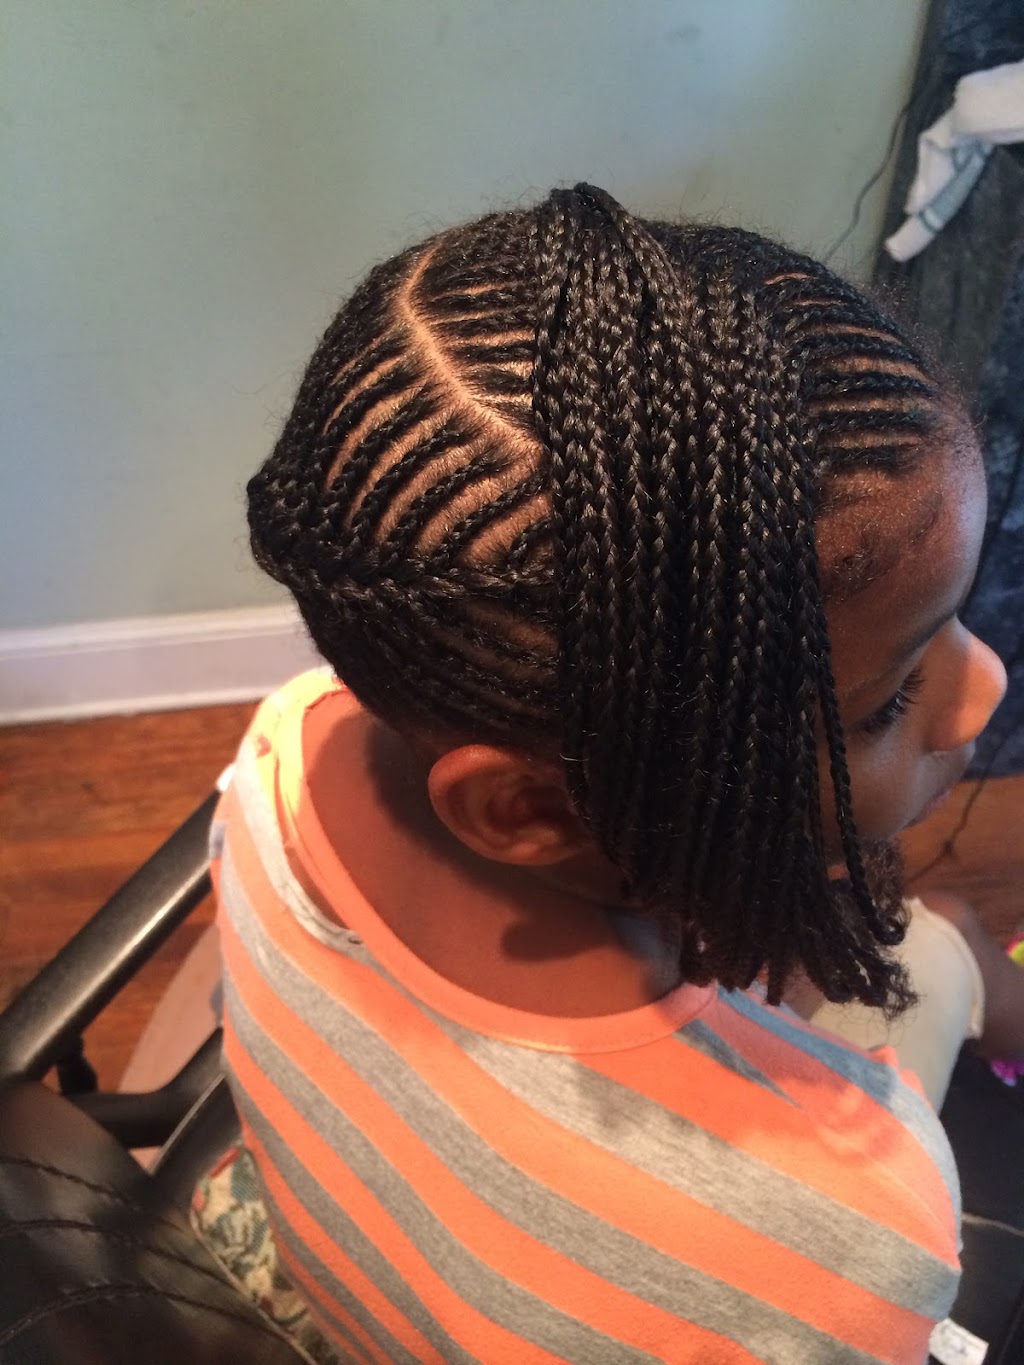 The Braid Factory | 490 Riverview Dr, Totowa, NJ 07512 | Phone: (704) 712-5657